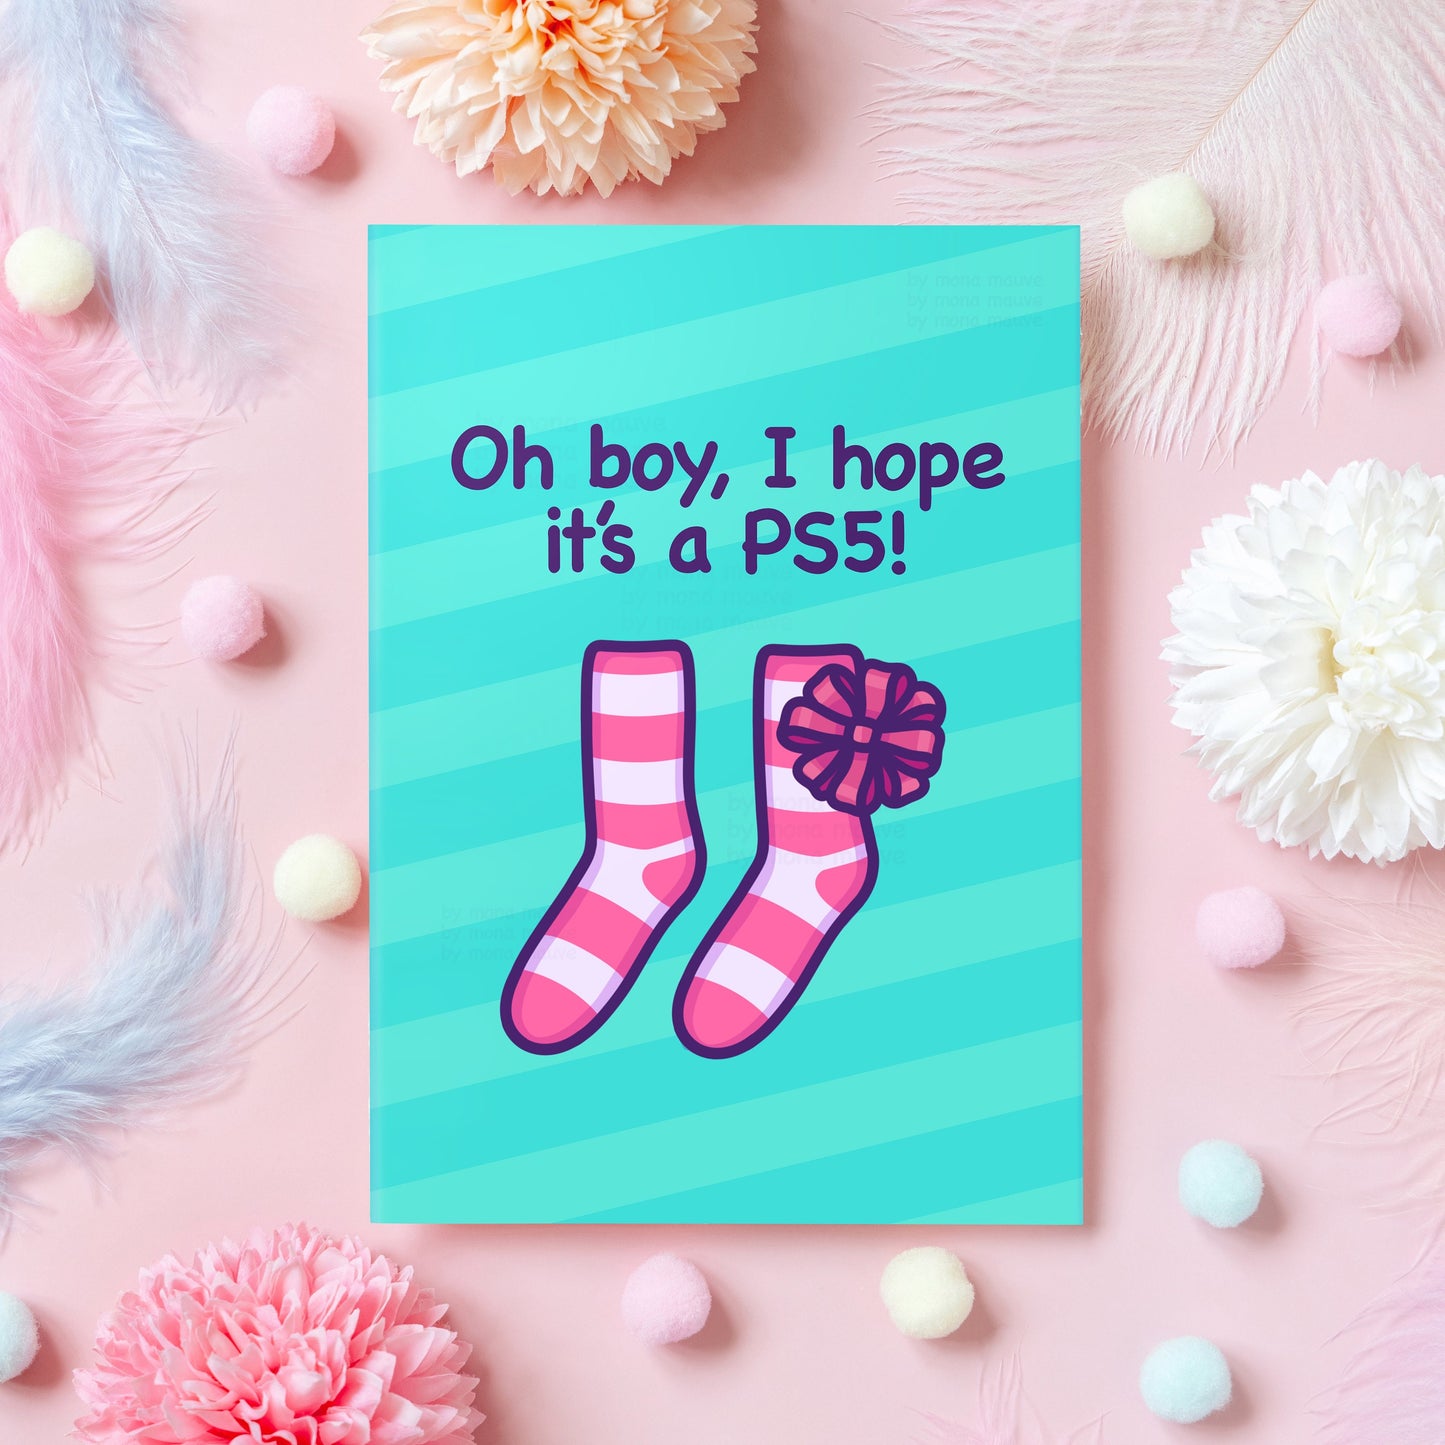 Funny Gamer Christmas Card | I Hope It's a PS5! | Humorous Christmas Gift for Boyfriend, Husband, Girlfriend, Brother, Son - Her or Him